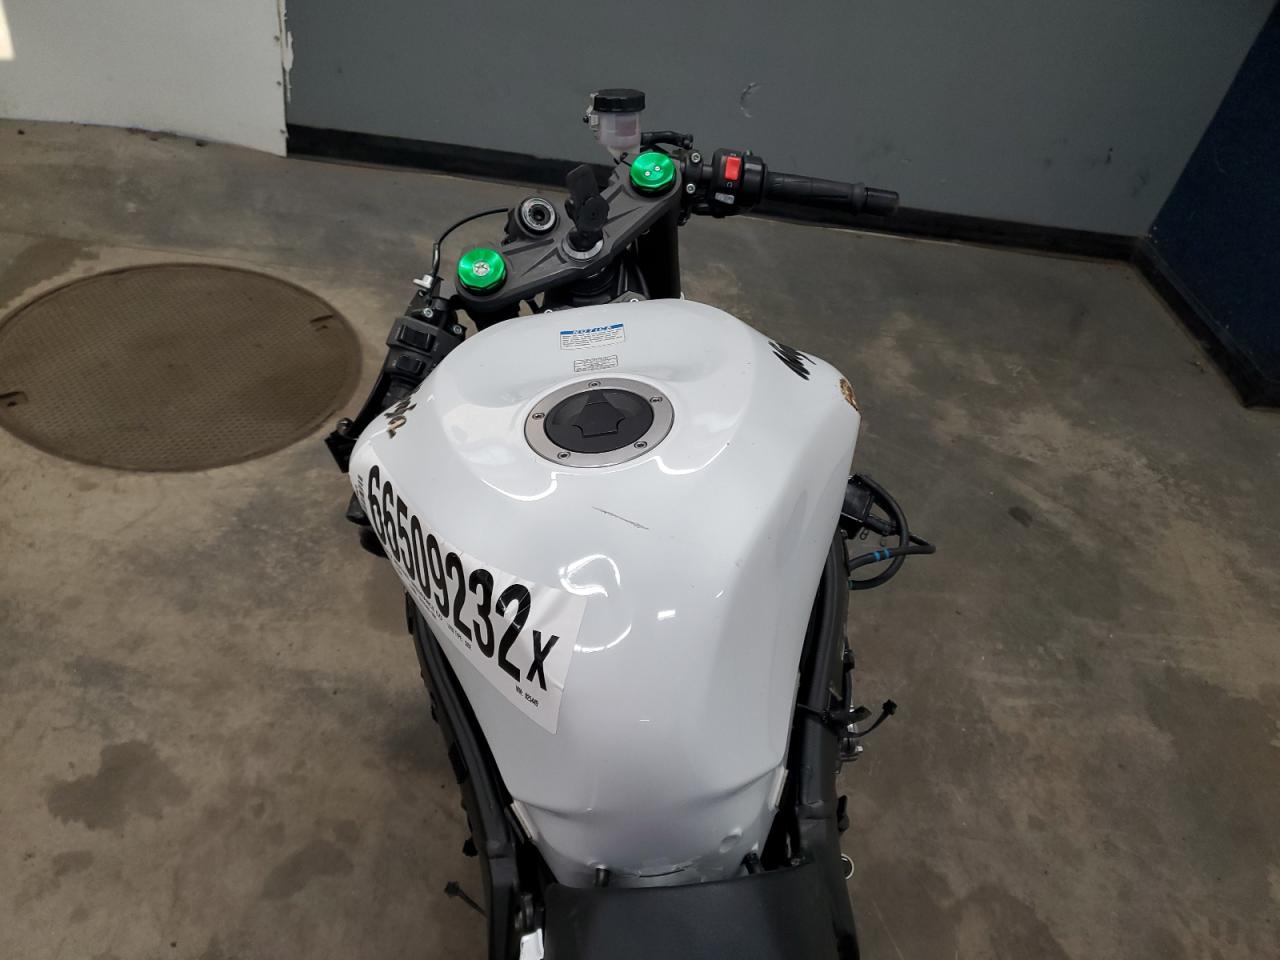 2017 Kawasaki ZX636 E for sale at Copart East Granby, CT. Lot 